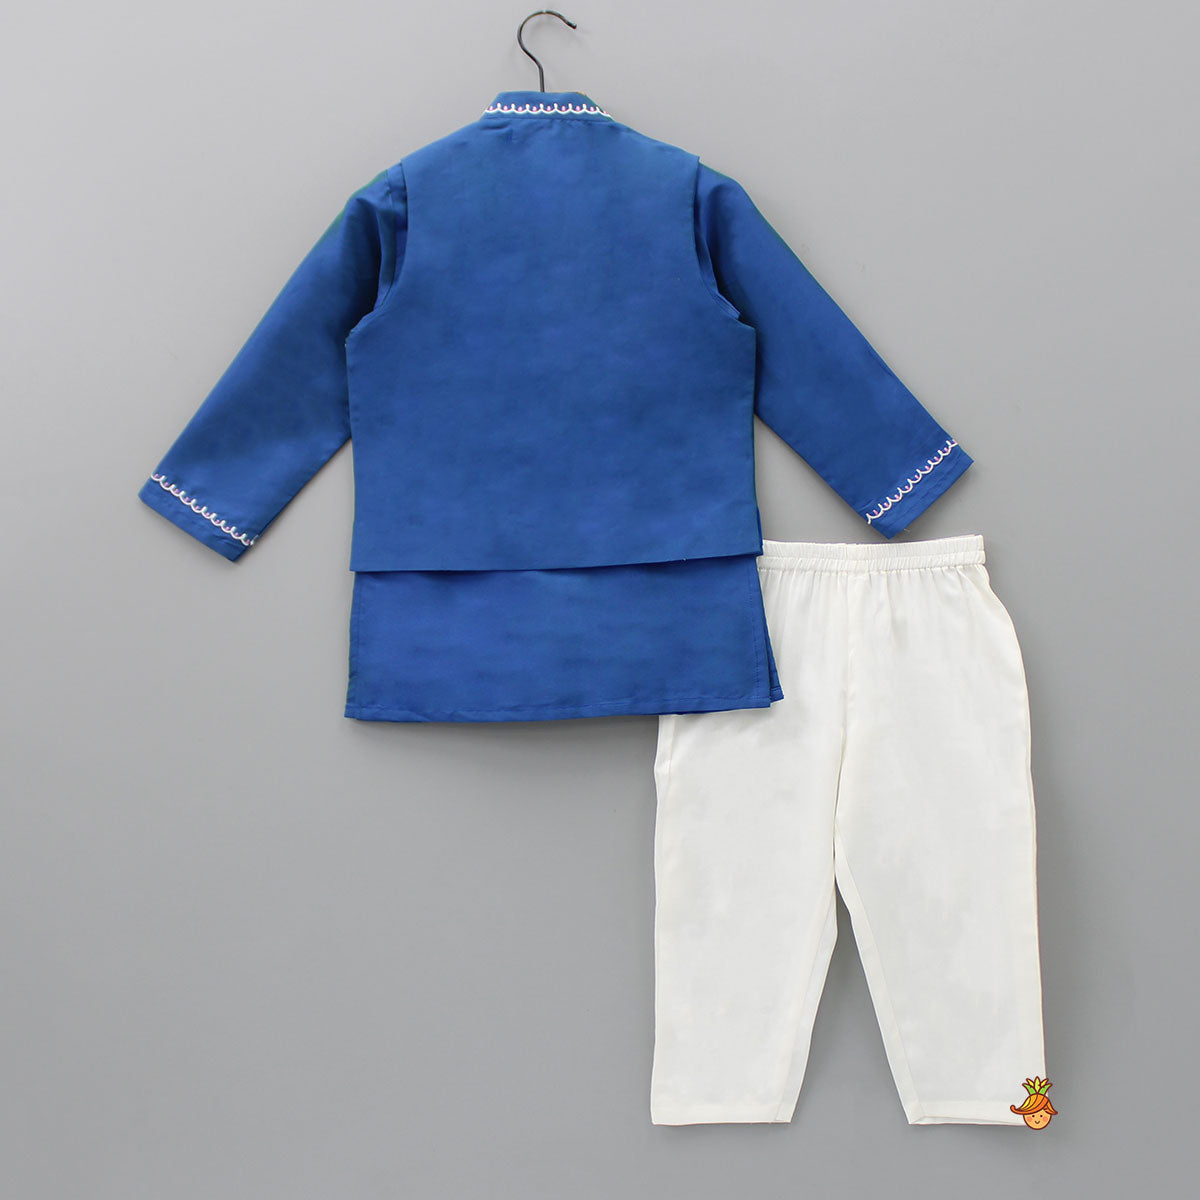 Blue Kurta With Camel Embroidered Side Buttons Jacket And Pyjama